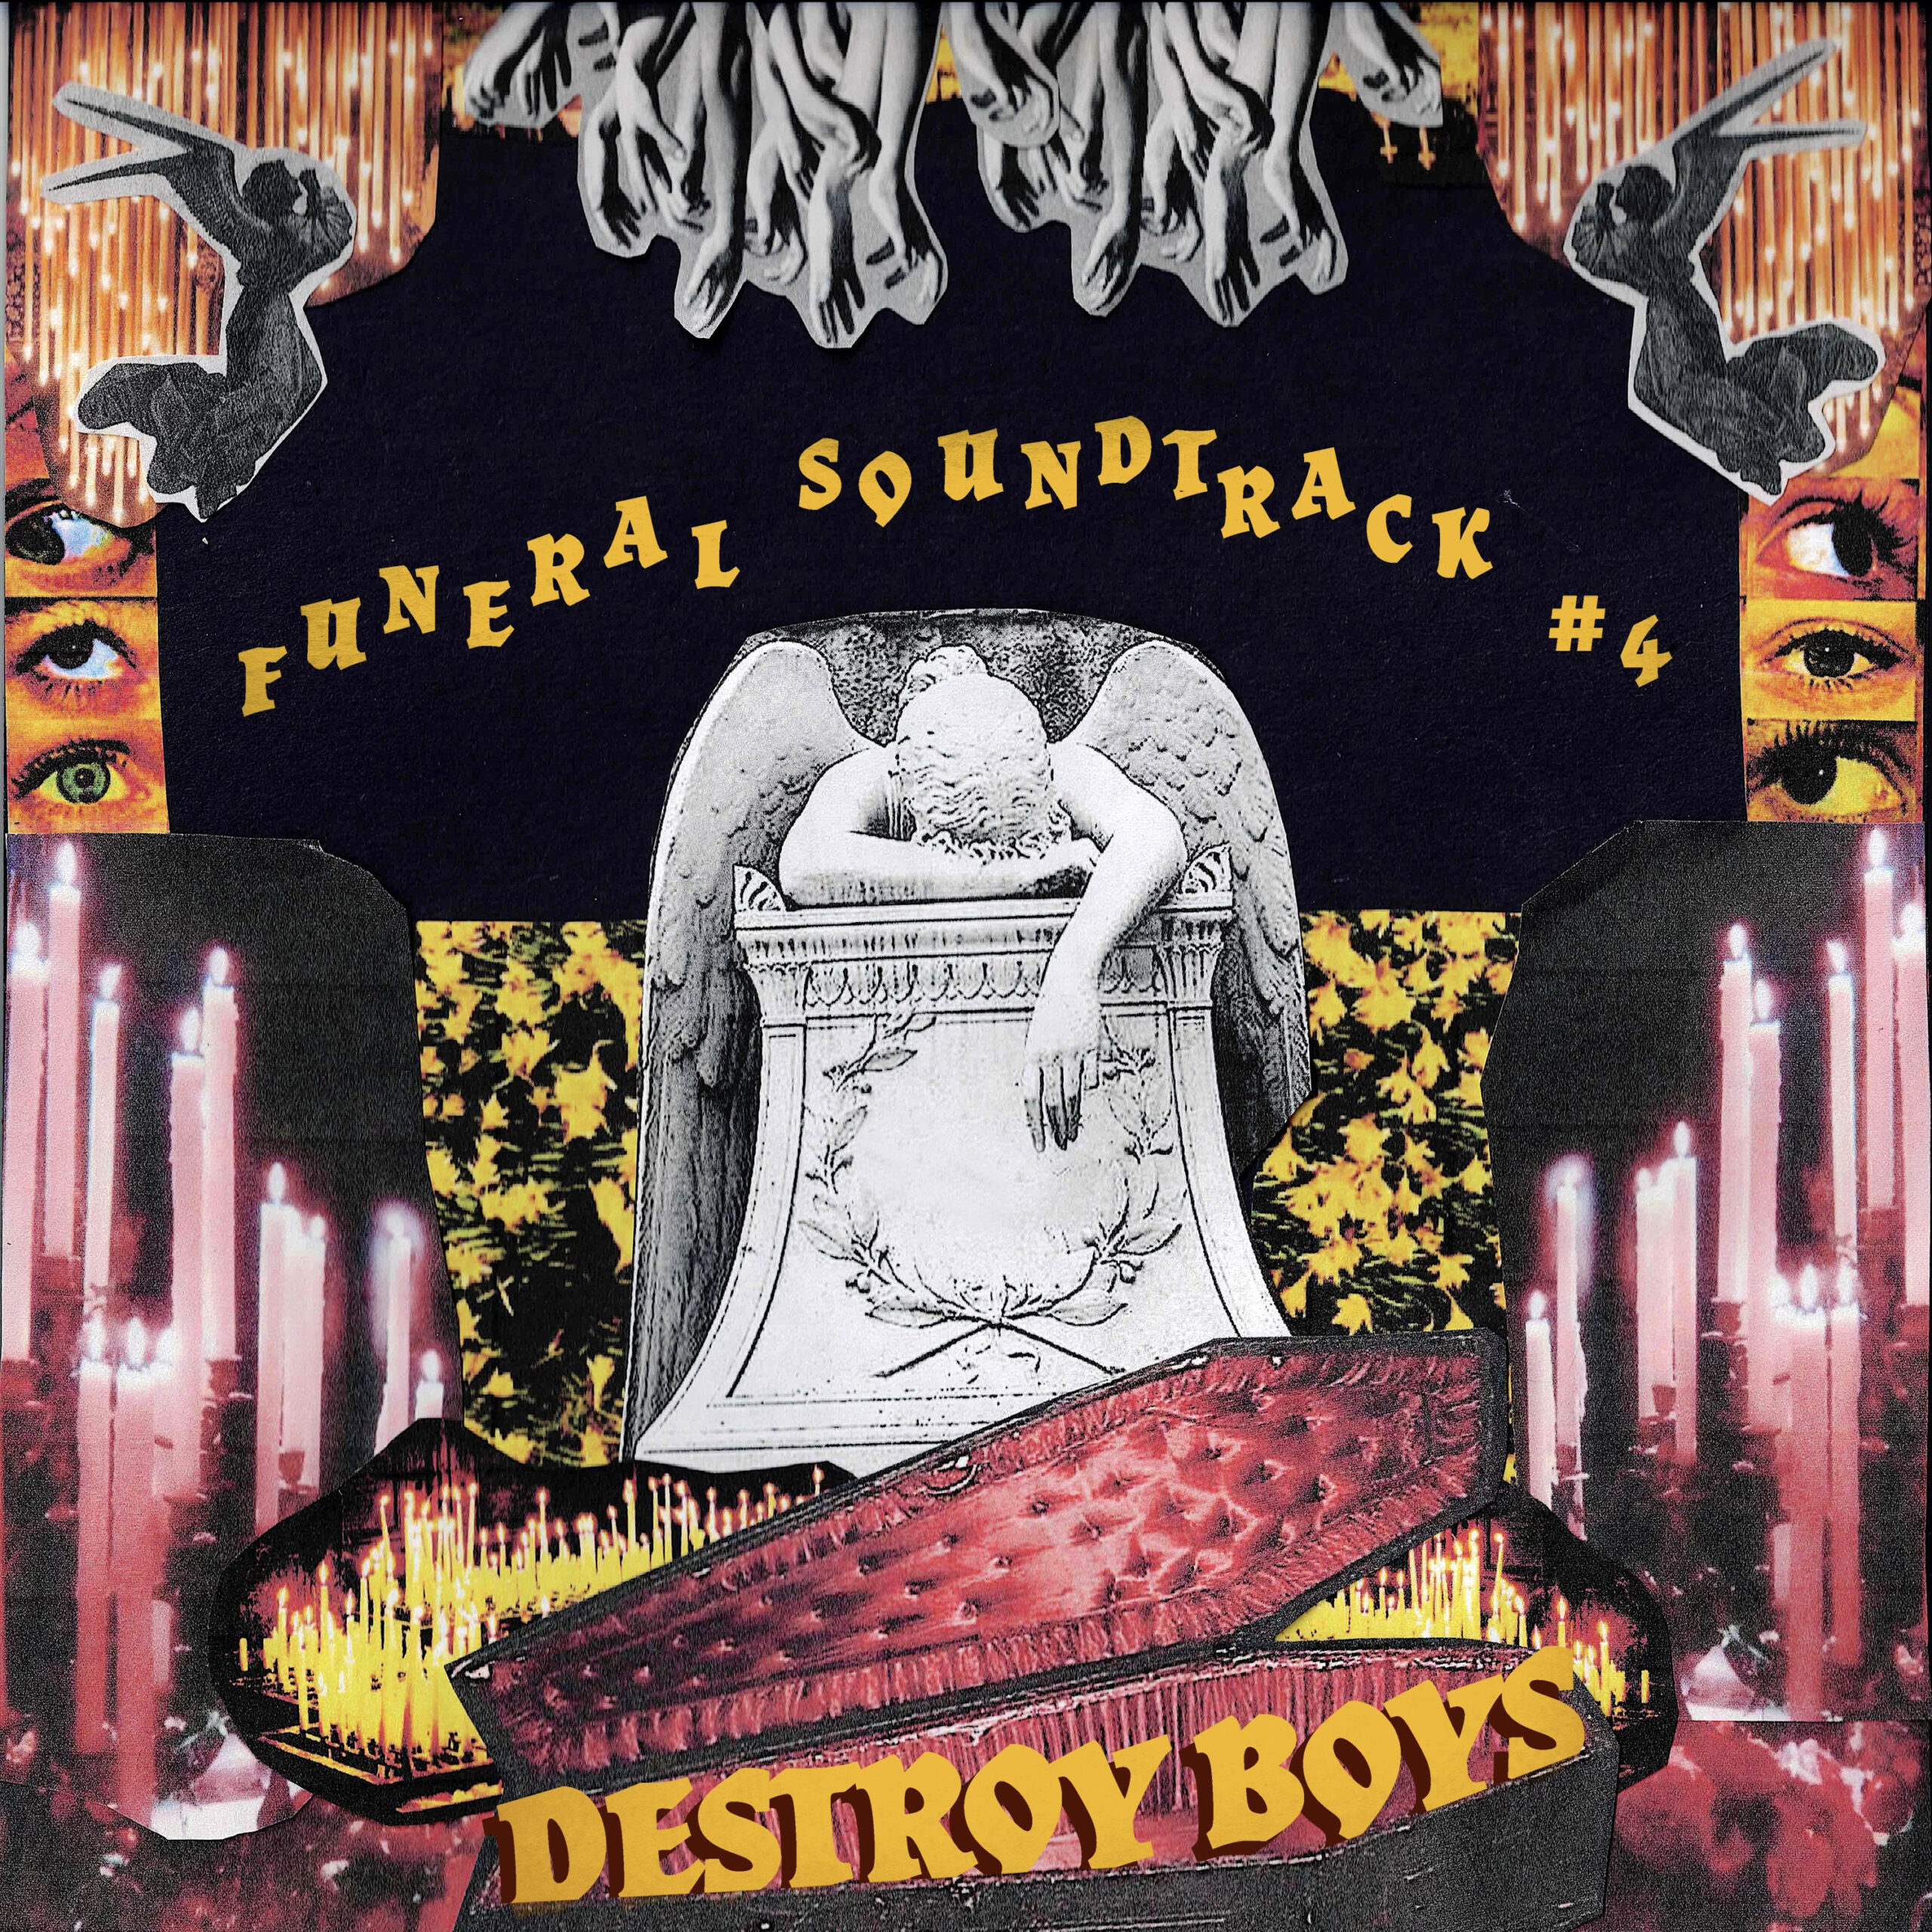 You are currently viewing Destroy Boys announce new album Funeral Soundtrack #4; release new song/video ‘Boyfeel’